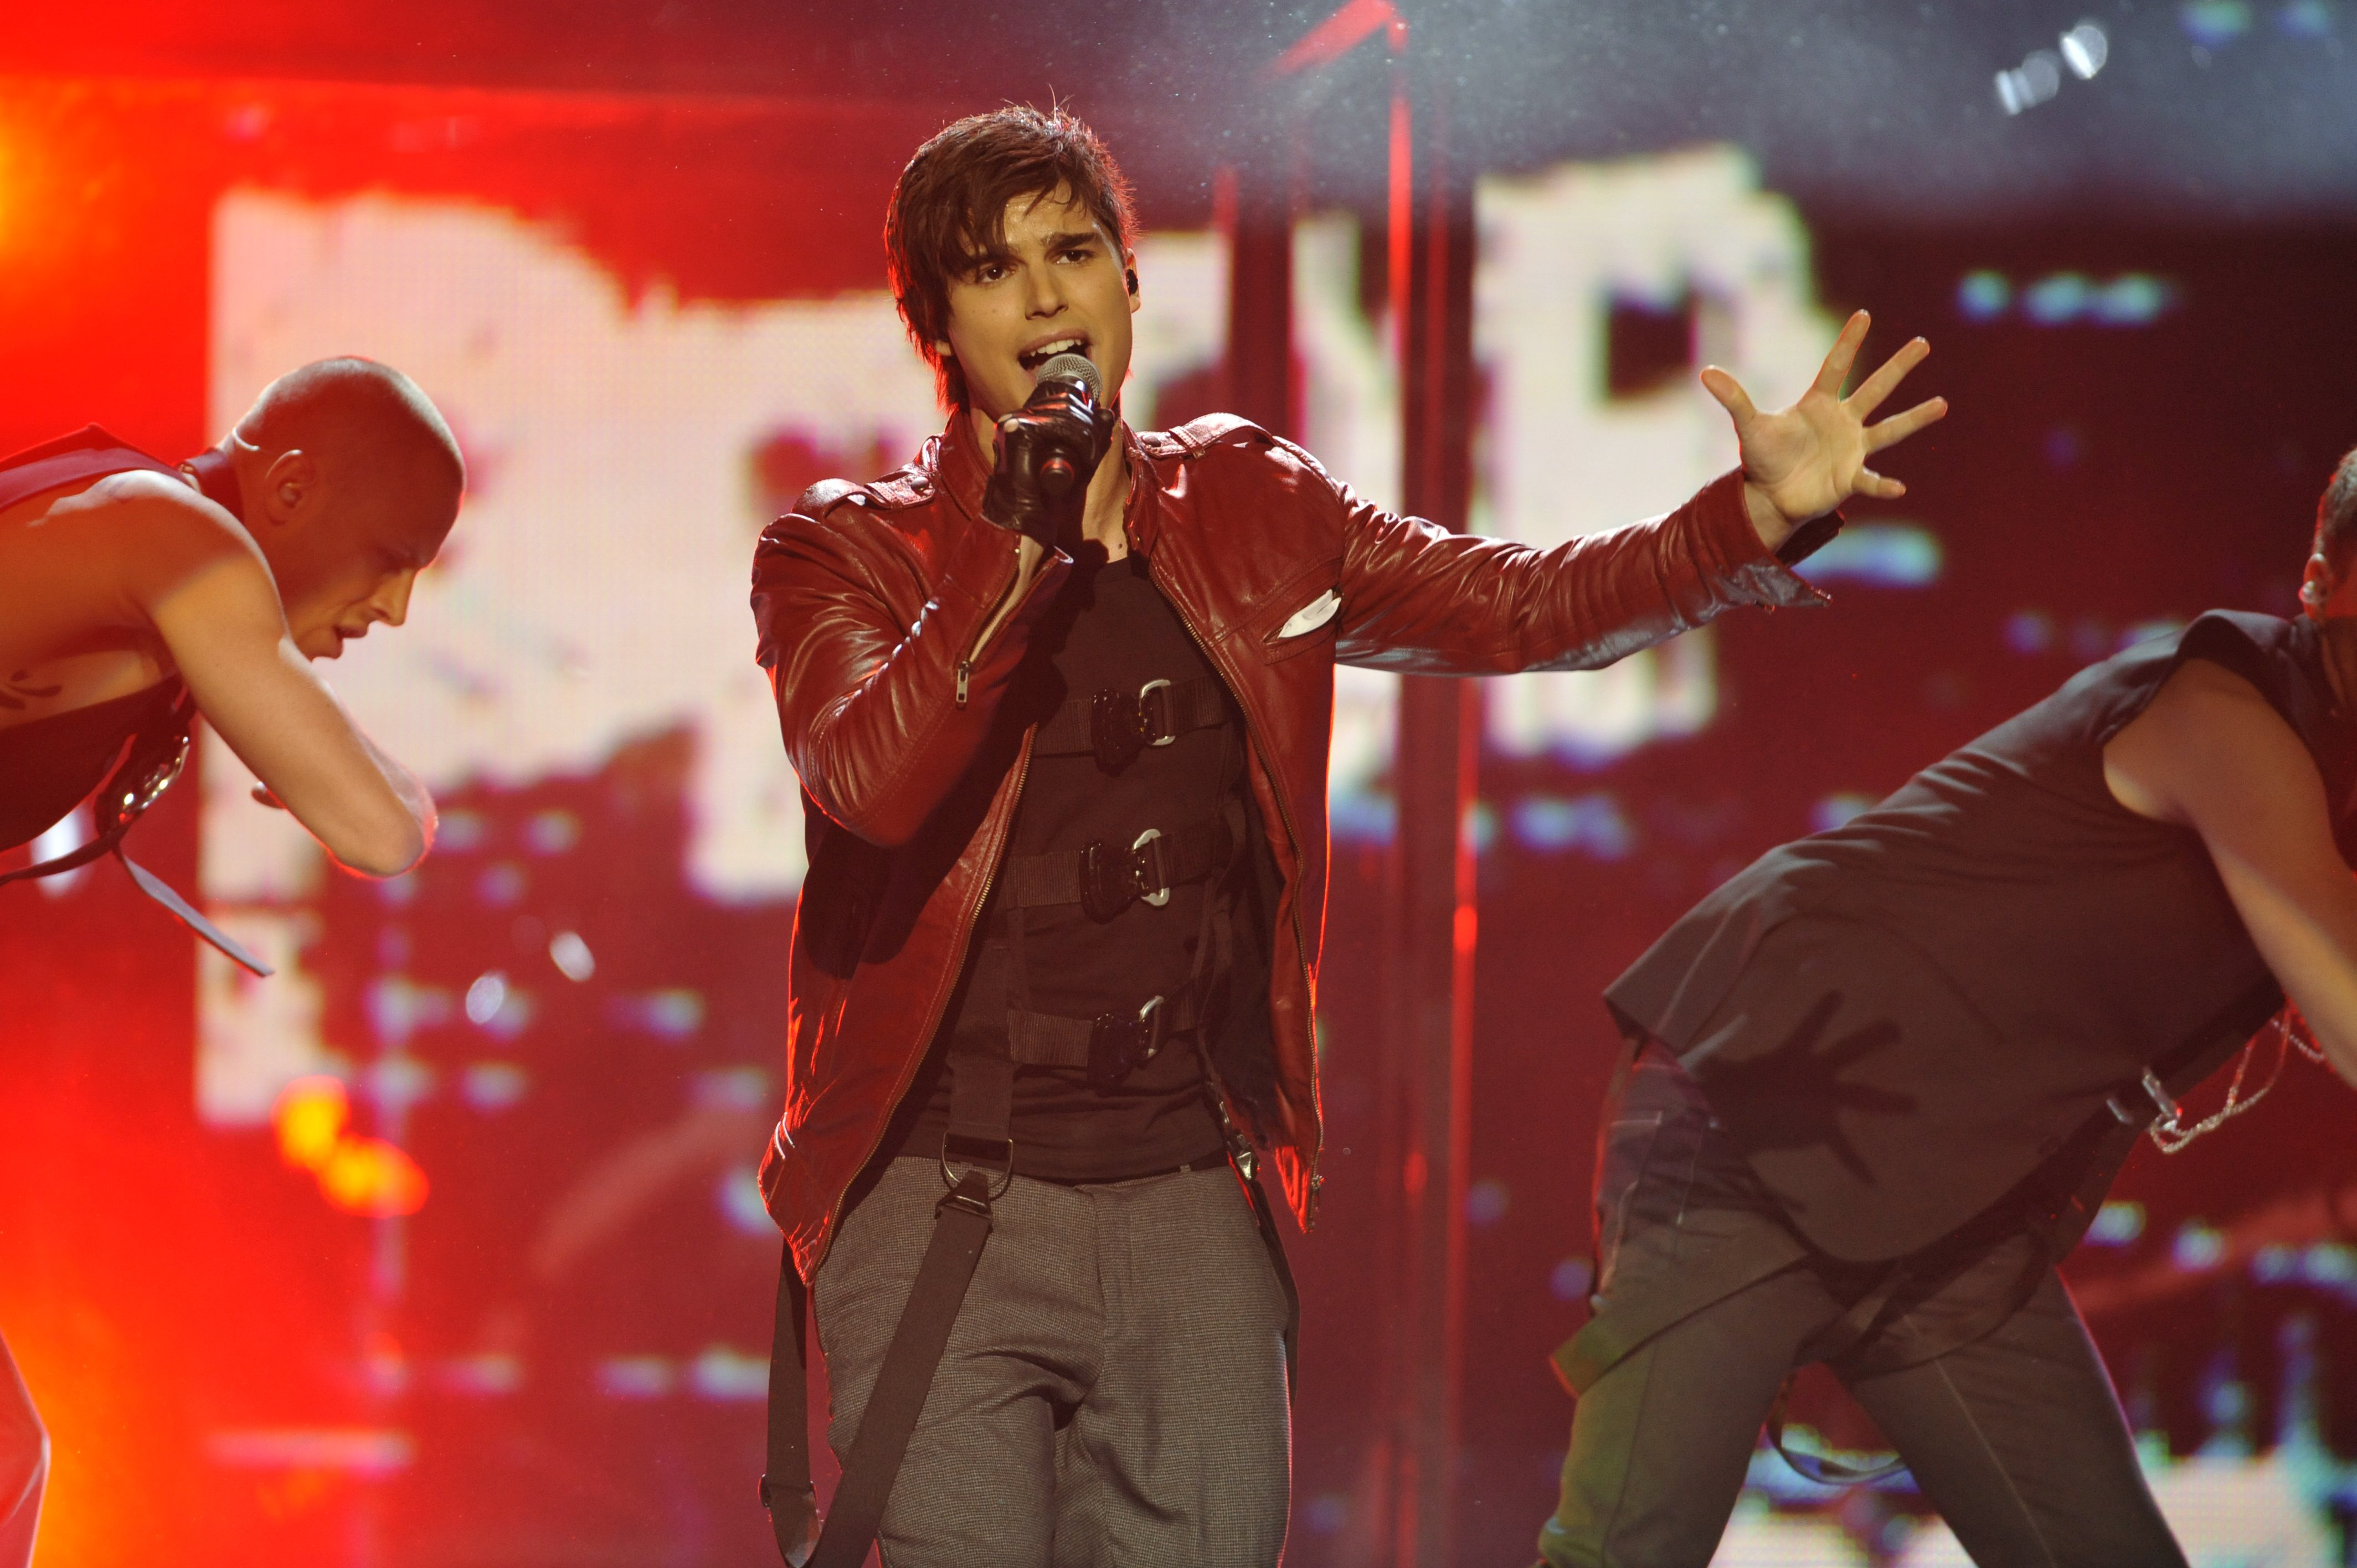 Eurovision Song Contest, Eric Saade